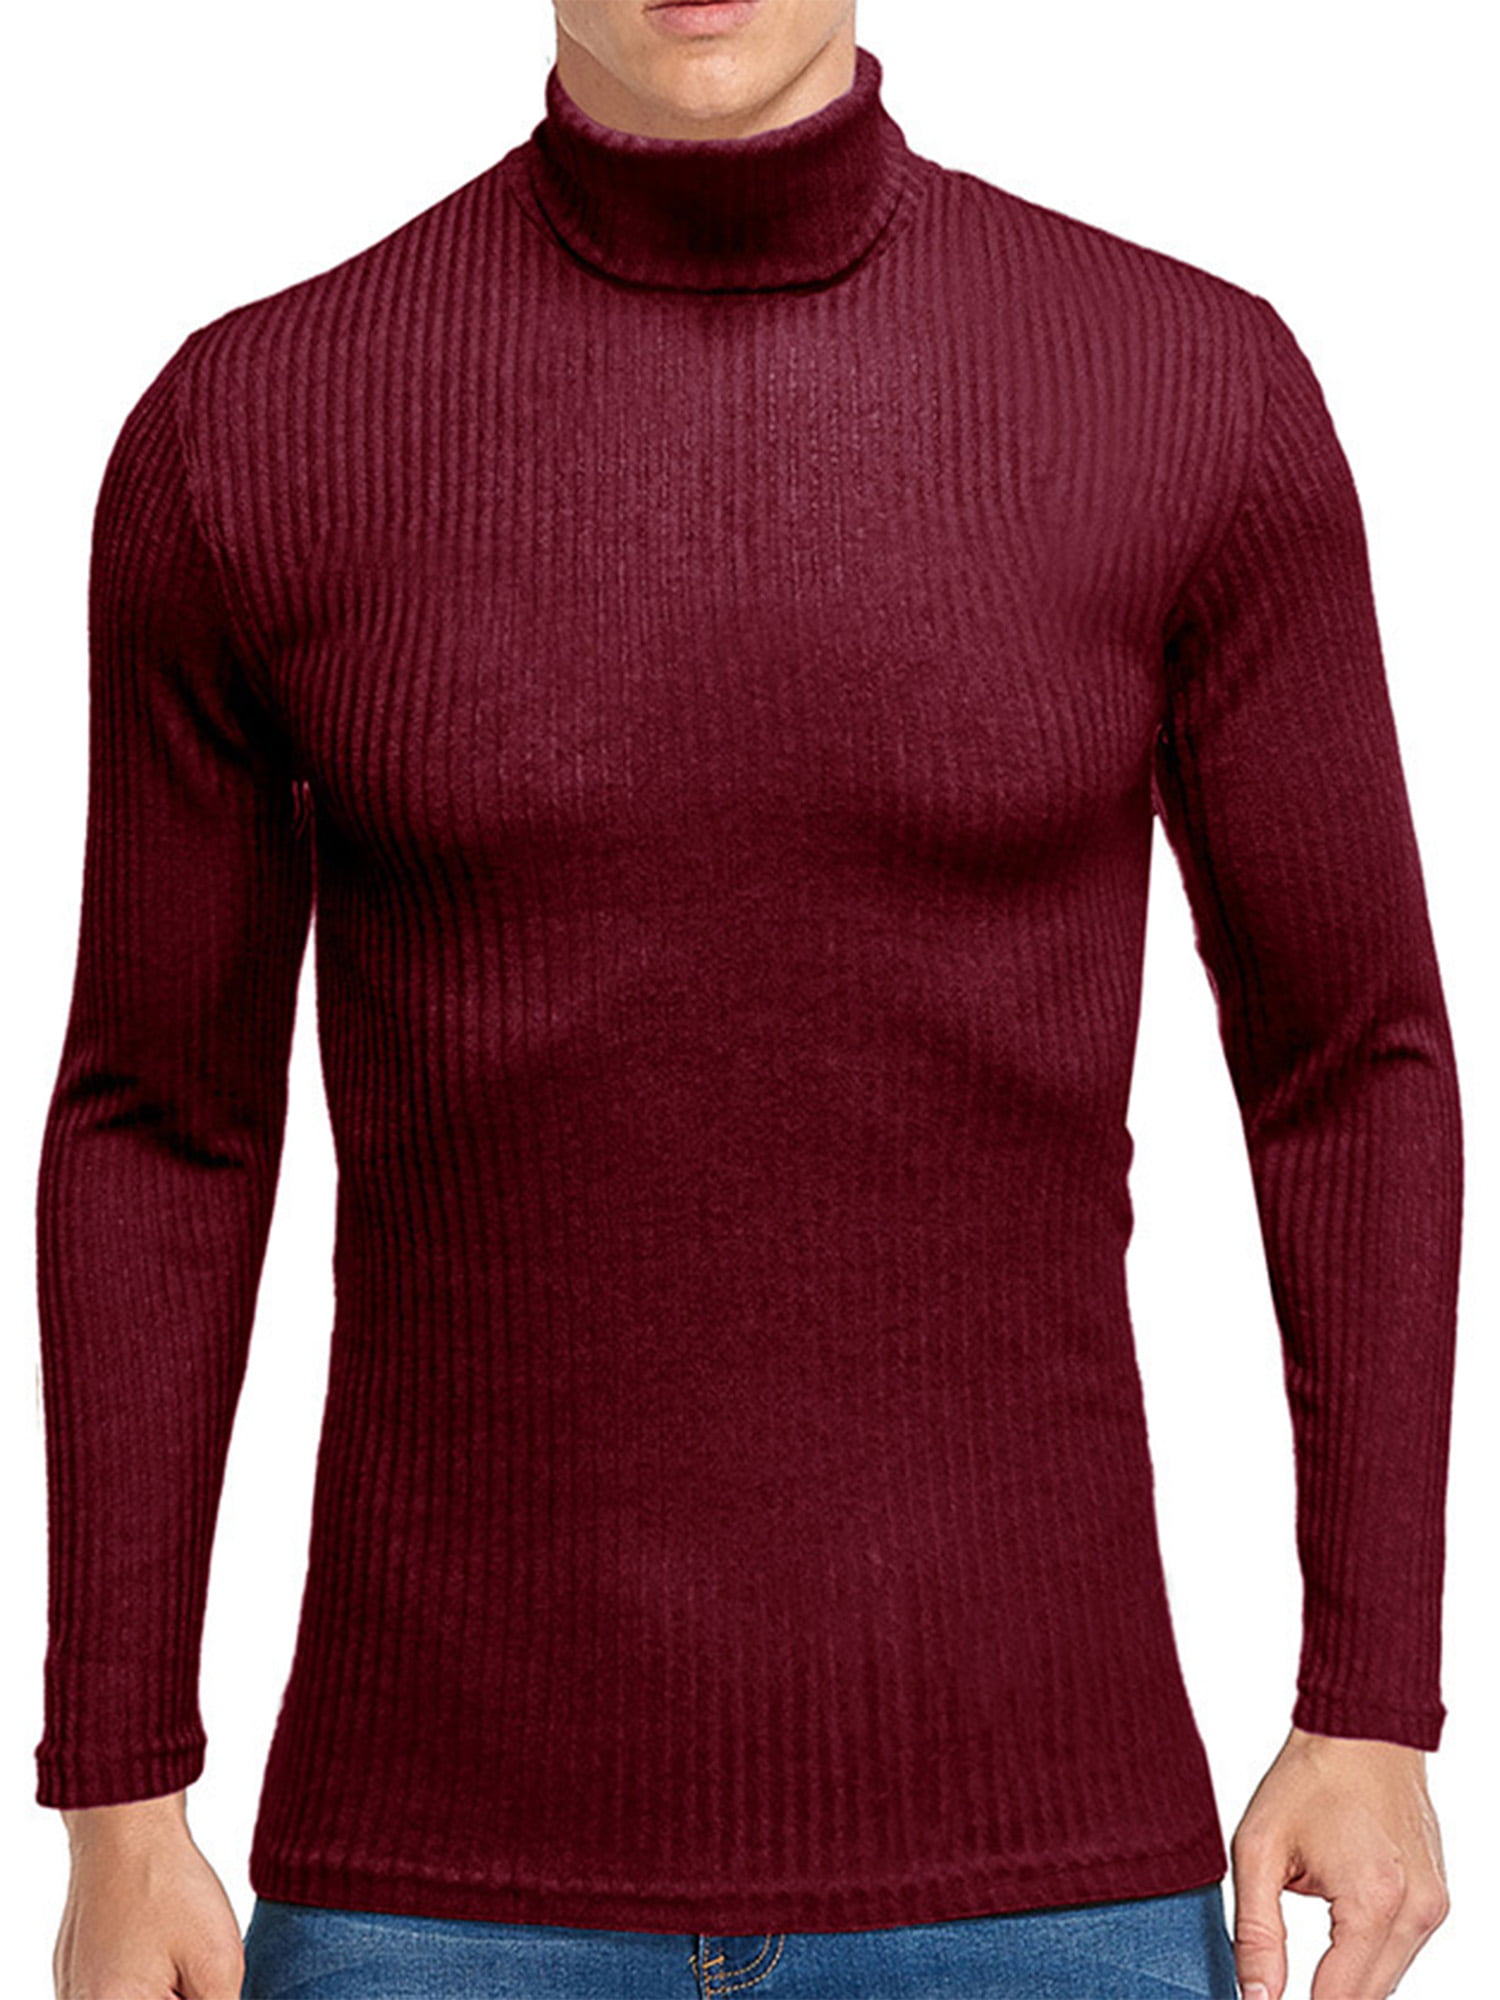 Men Boy Thermal Shirt Long Sleeve Tops Knitted Sweater Pullover High Neck Jumper 